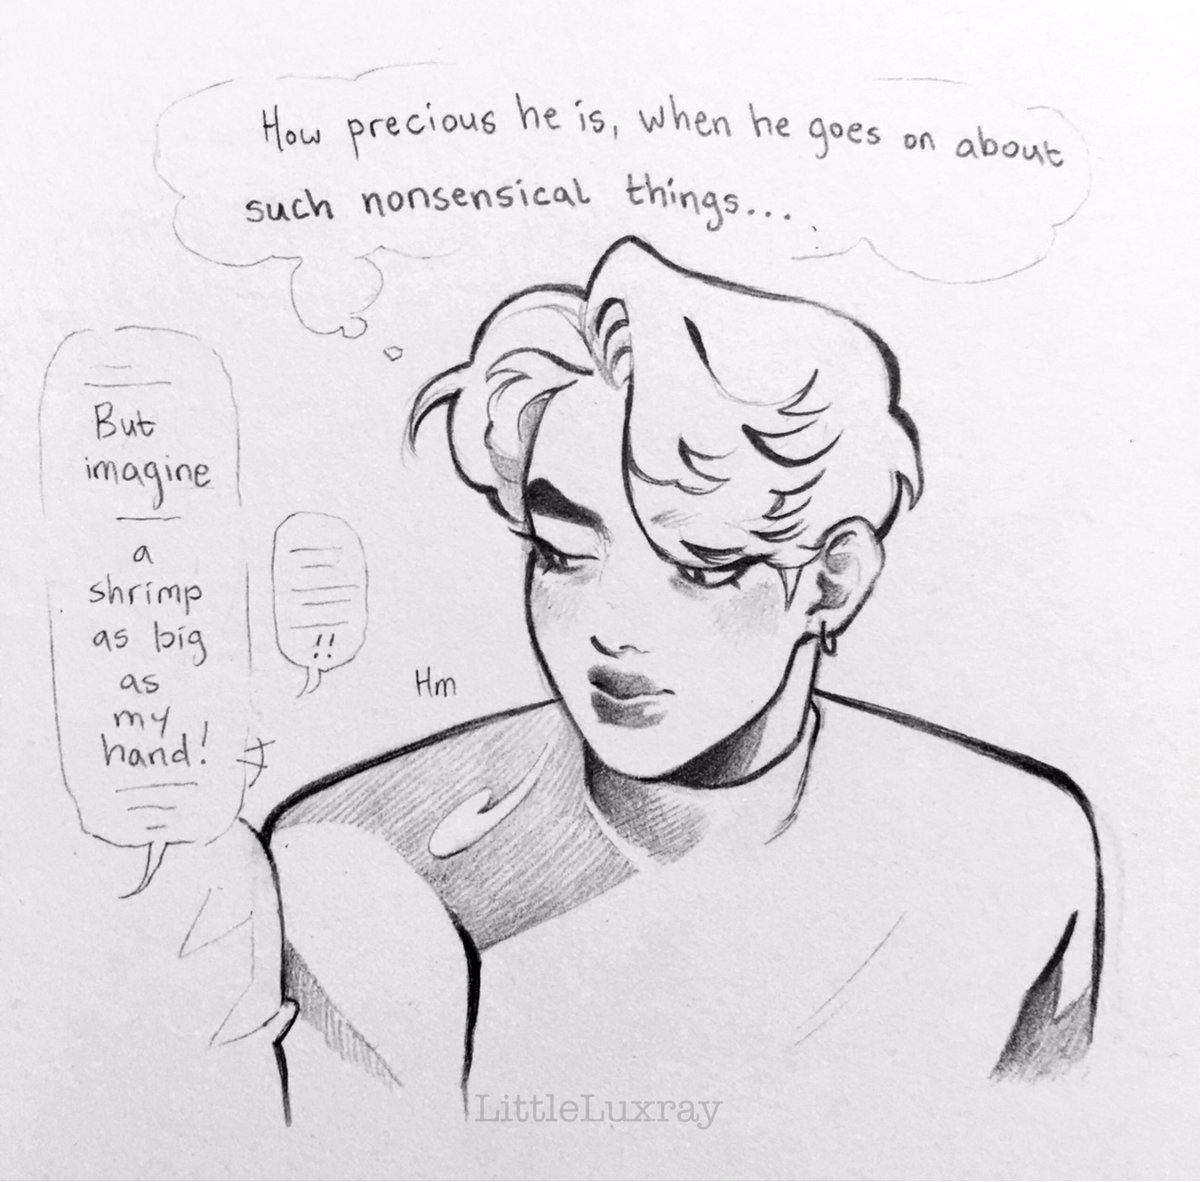 [Vampire AU] It's been hard for Jin to focus as of late... heavy thoughts weigh him down. At least Jk's here now ? 